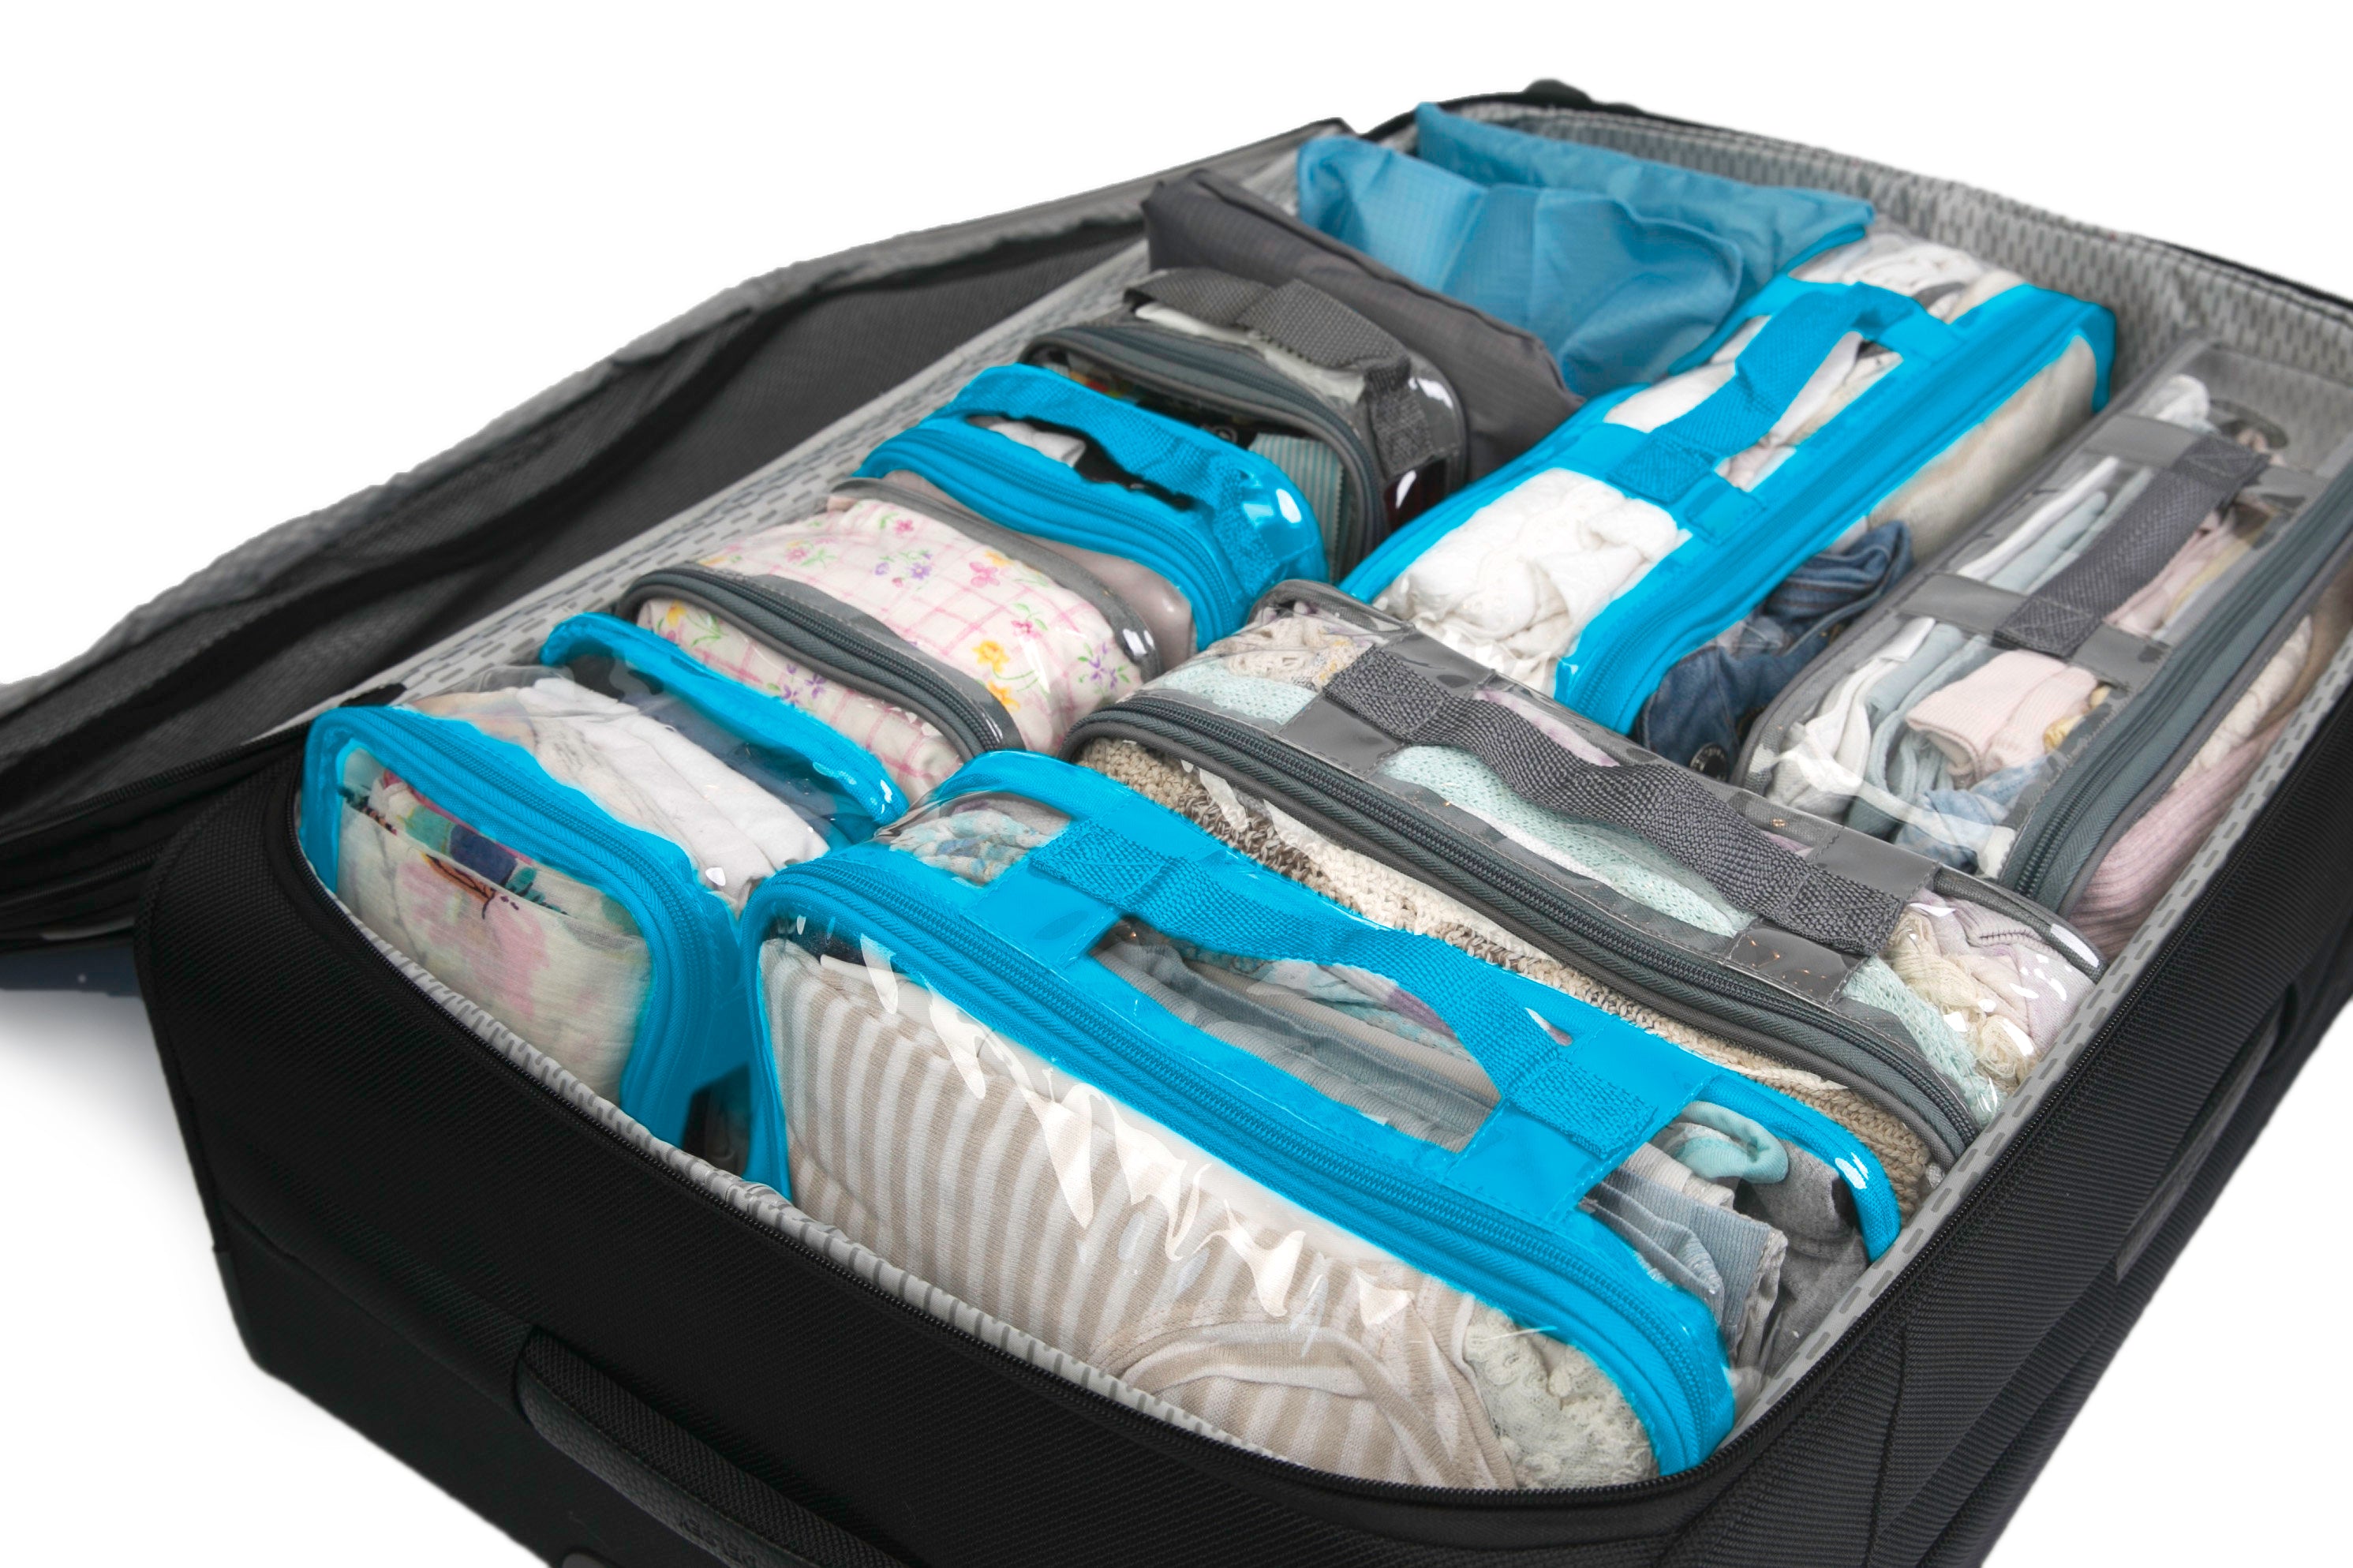 Grey and blue Packing cubes inside an organized suitcase